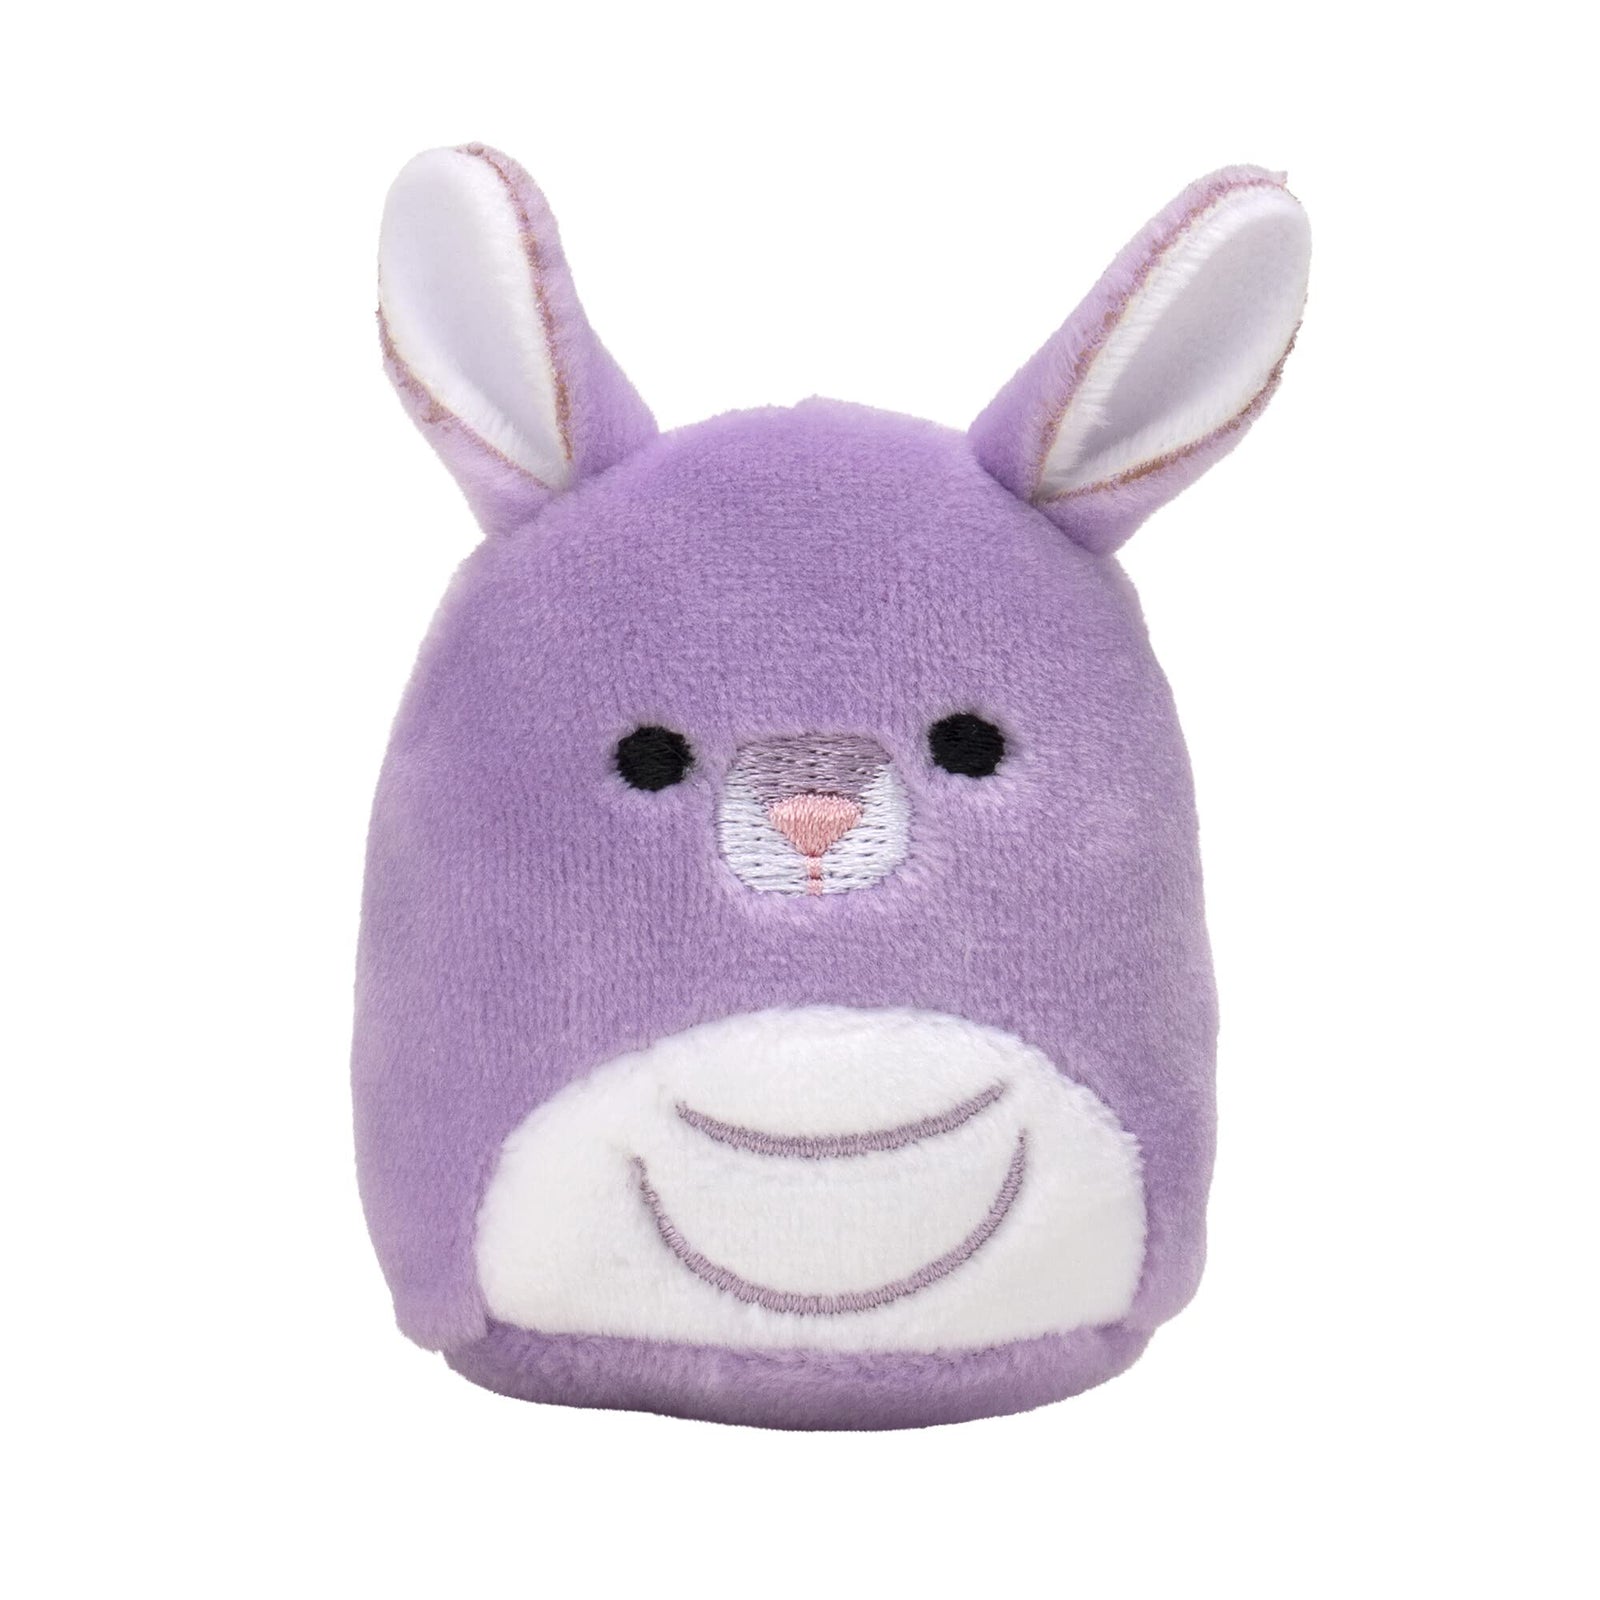 Squishville Mystery Mini-Squishmallows Plush - Wildlife Squad - Six 2-Inch Mini Plush Characters - Includes Michaela and Kiki Plus Four Mystery Figures - Irresistibly Soft, Colorful Plush